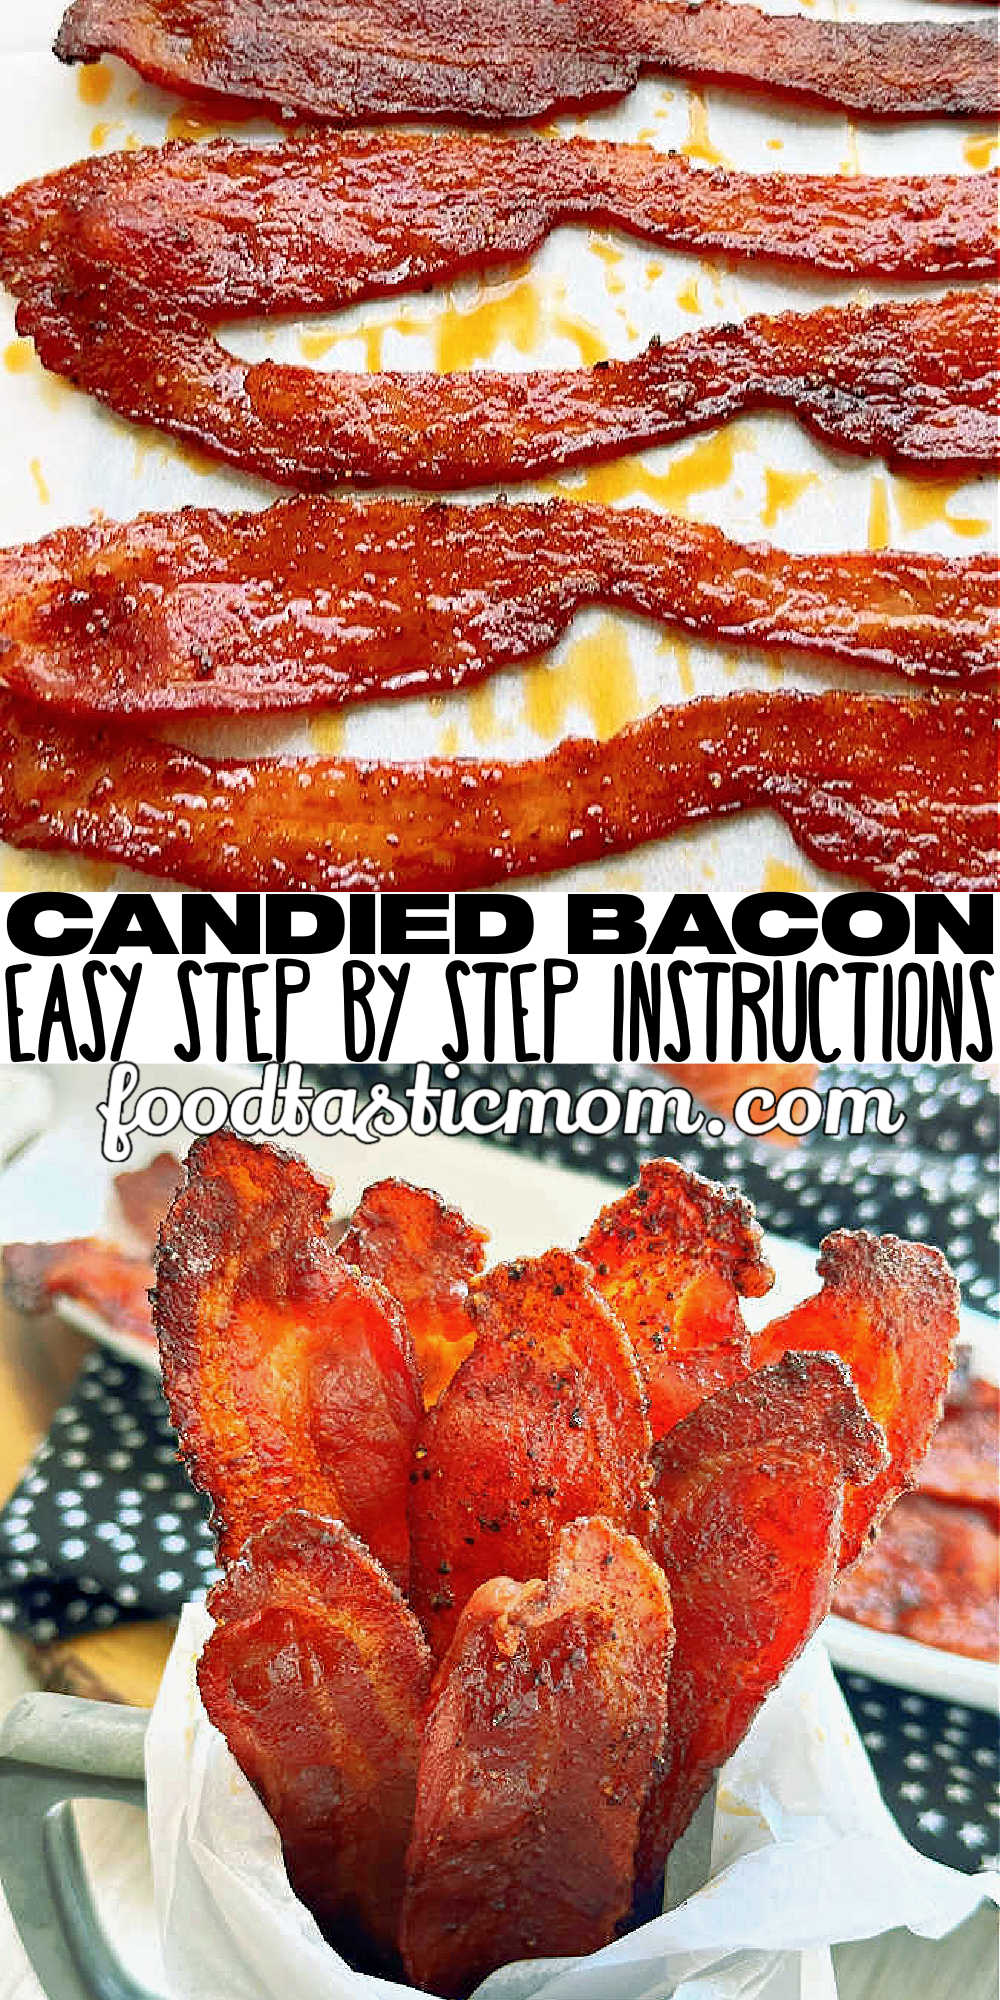 This delicious recipe for candied bacon combines brown sugar and spices with a splash of bourbon to easily brush on the bacon before baking. via @foodtasticmom